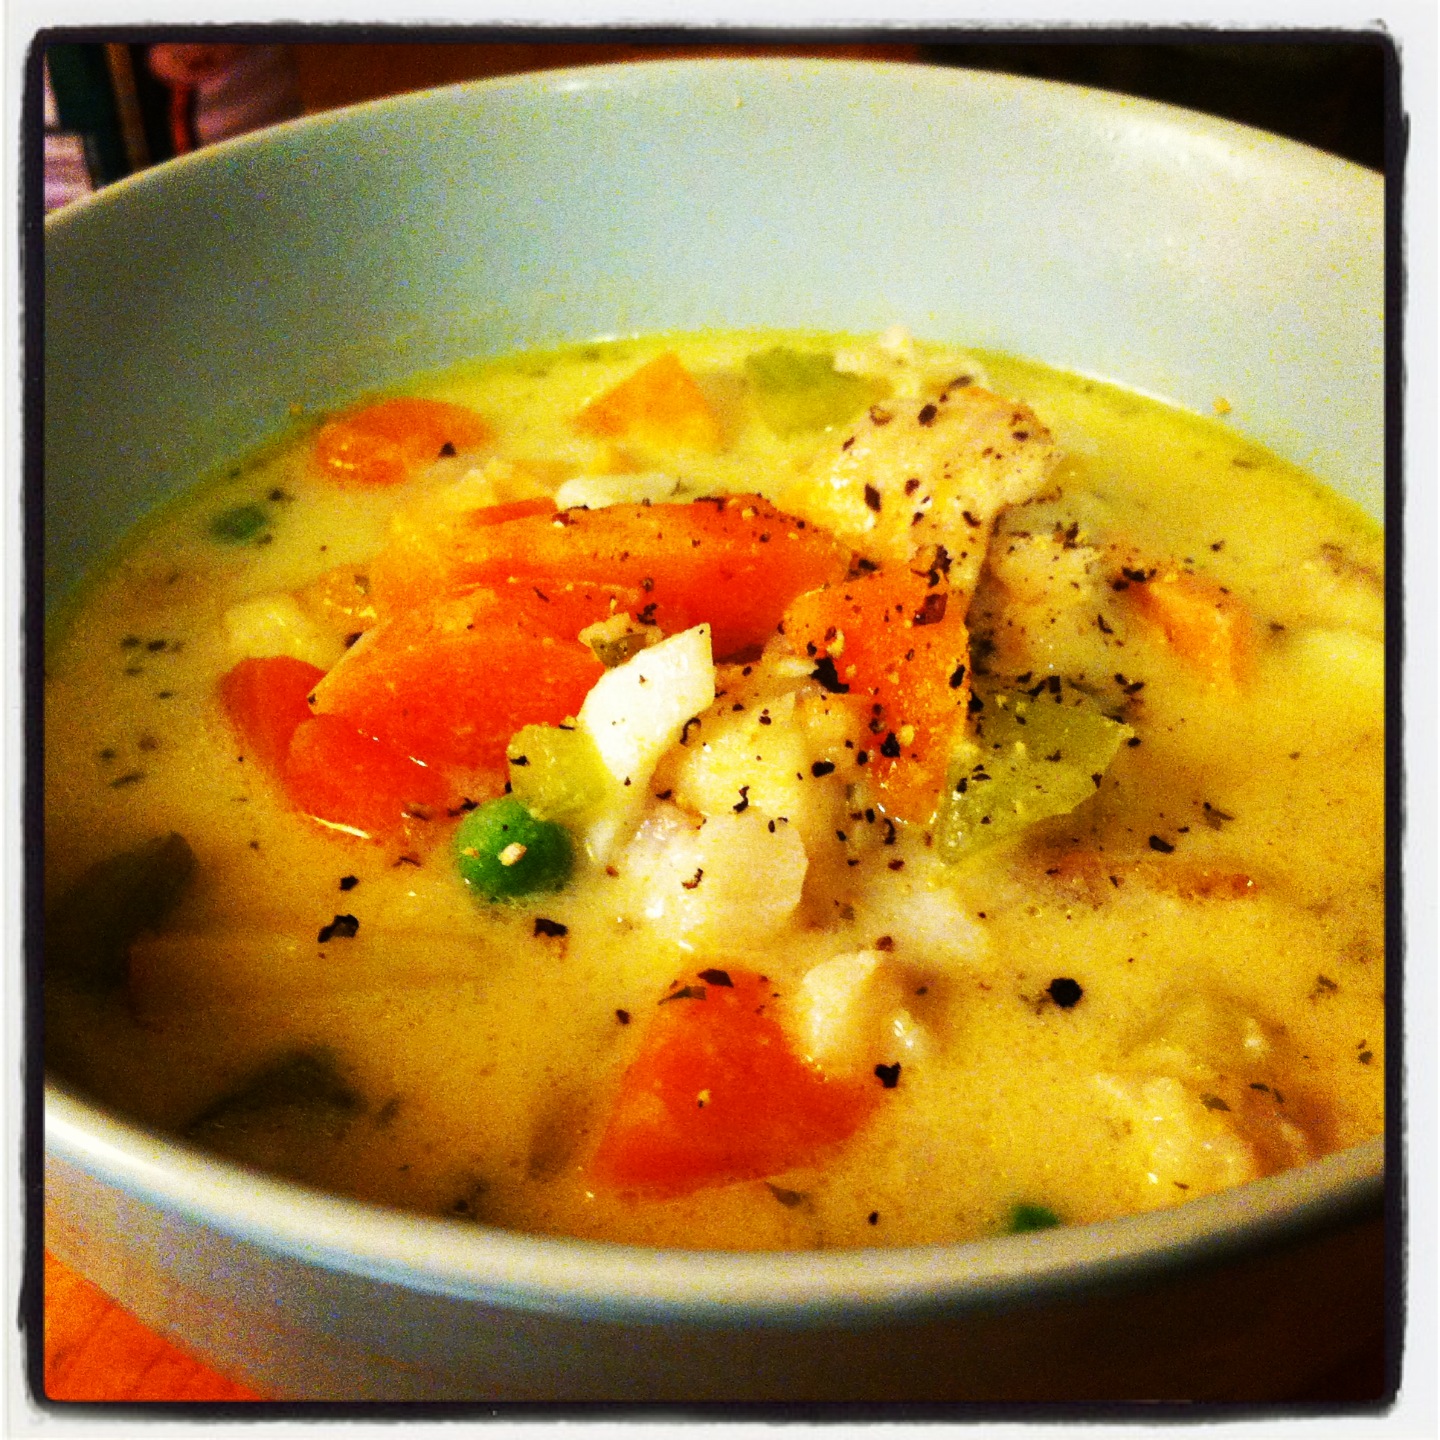 Gluten and Dairy Free Seafood Chowder